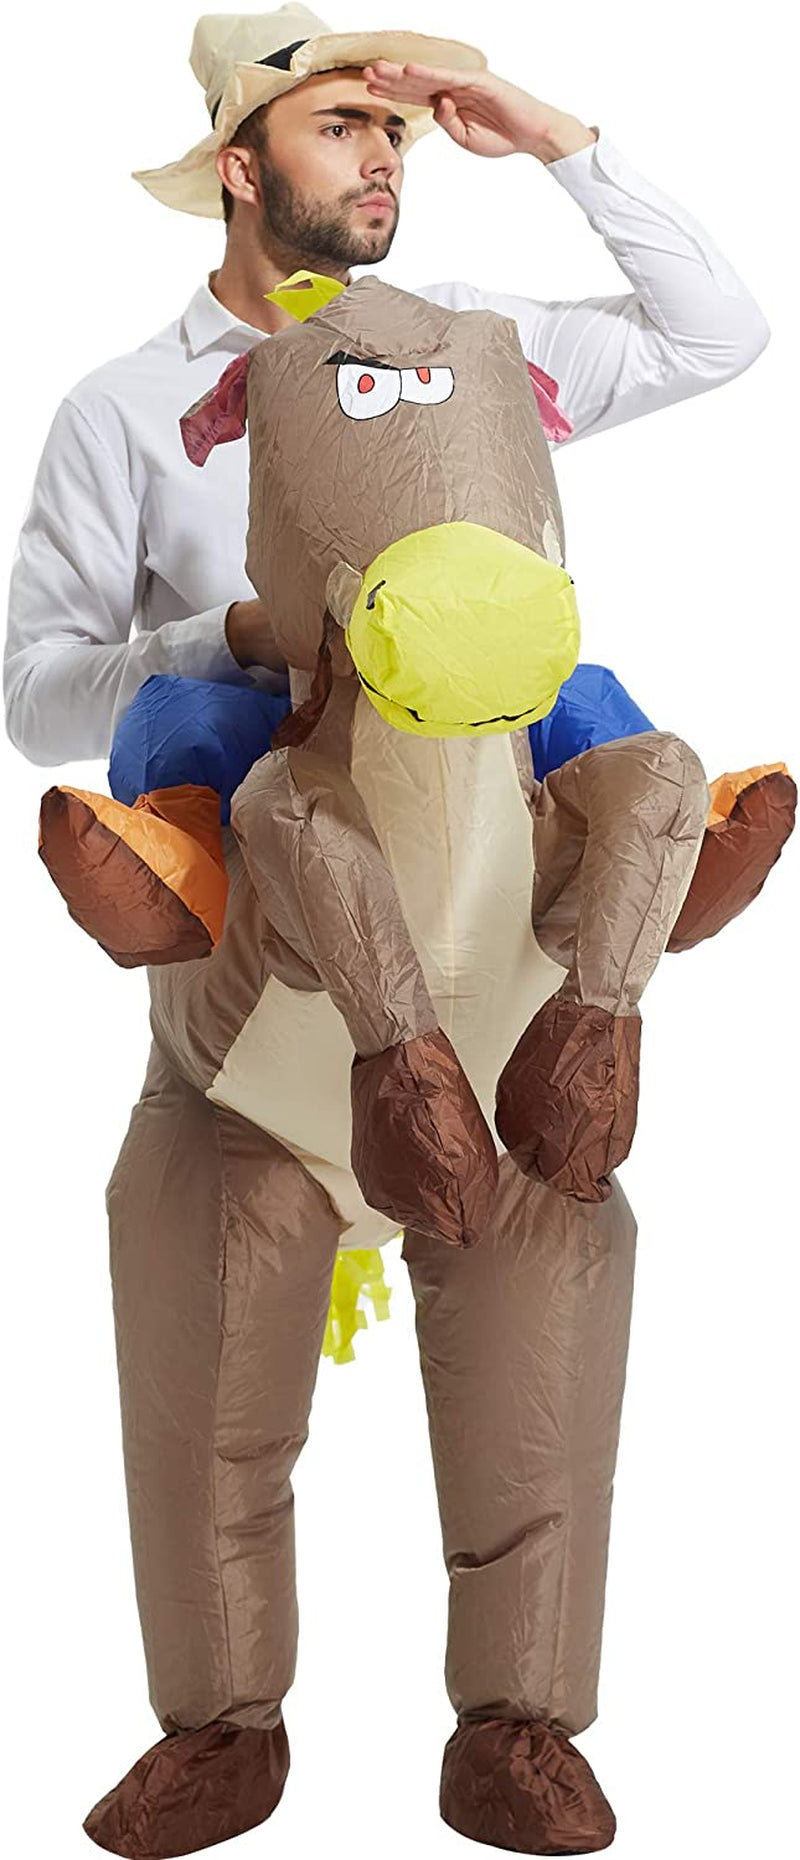 TOLOCO Inflatable Costume Adults and Kid, Cowboy Costume, Inflatable Horse Costum, Blow up Costume Halloween  Does Not Apply   